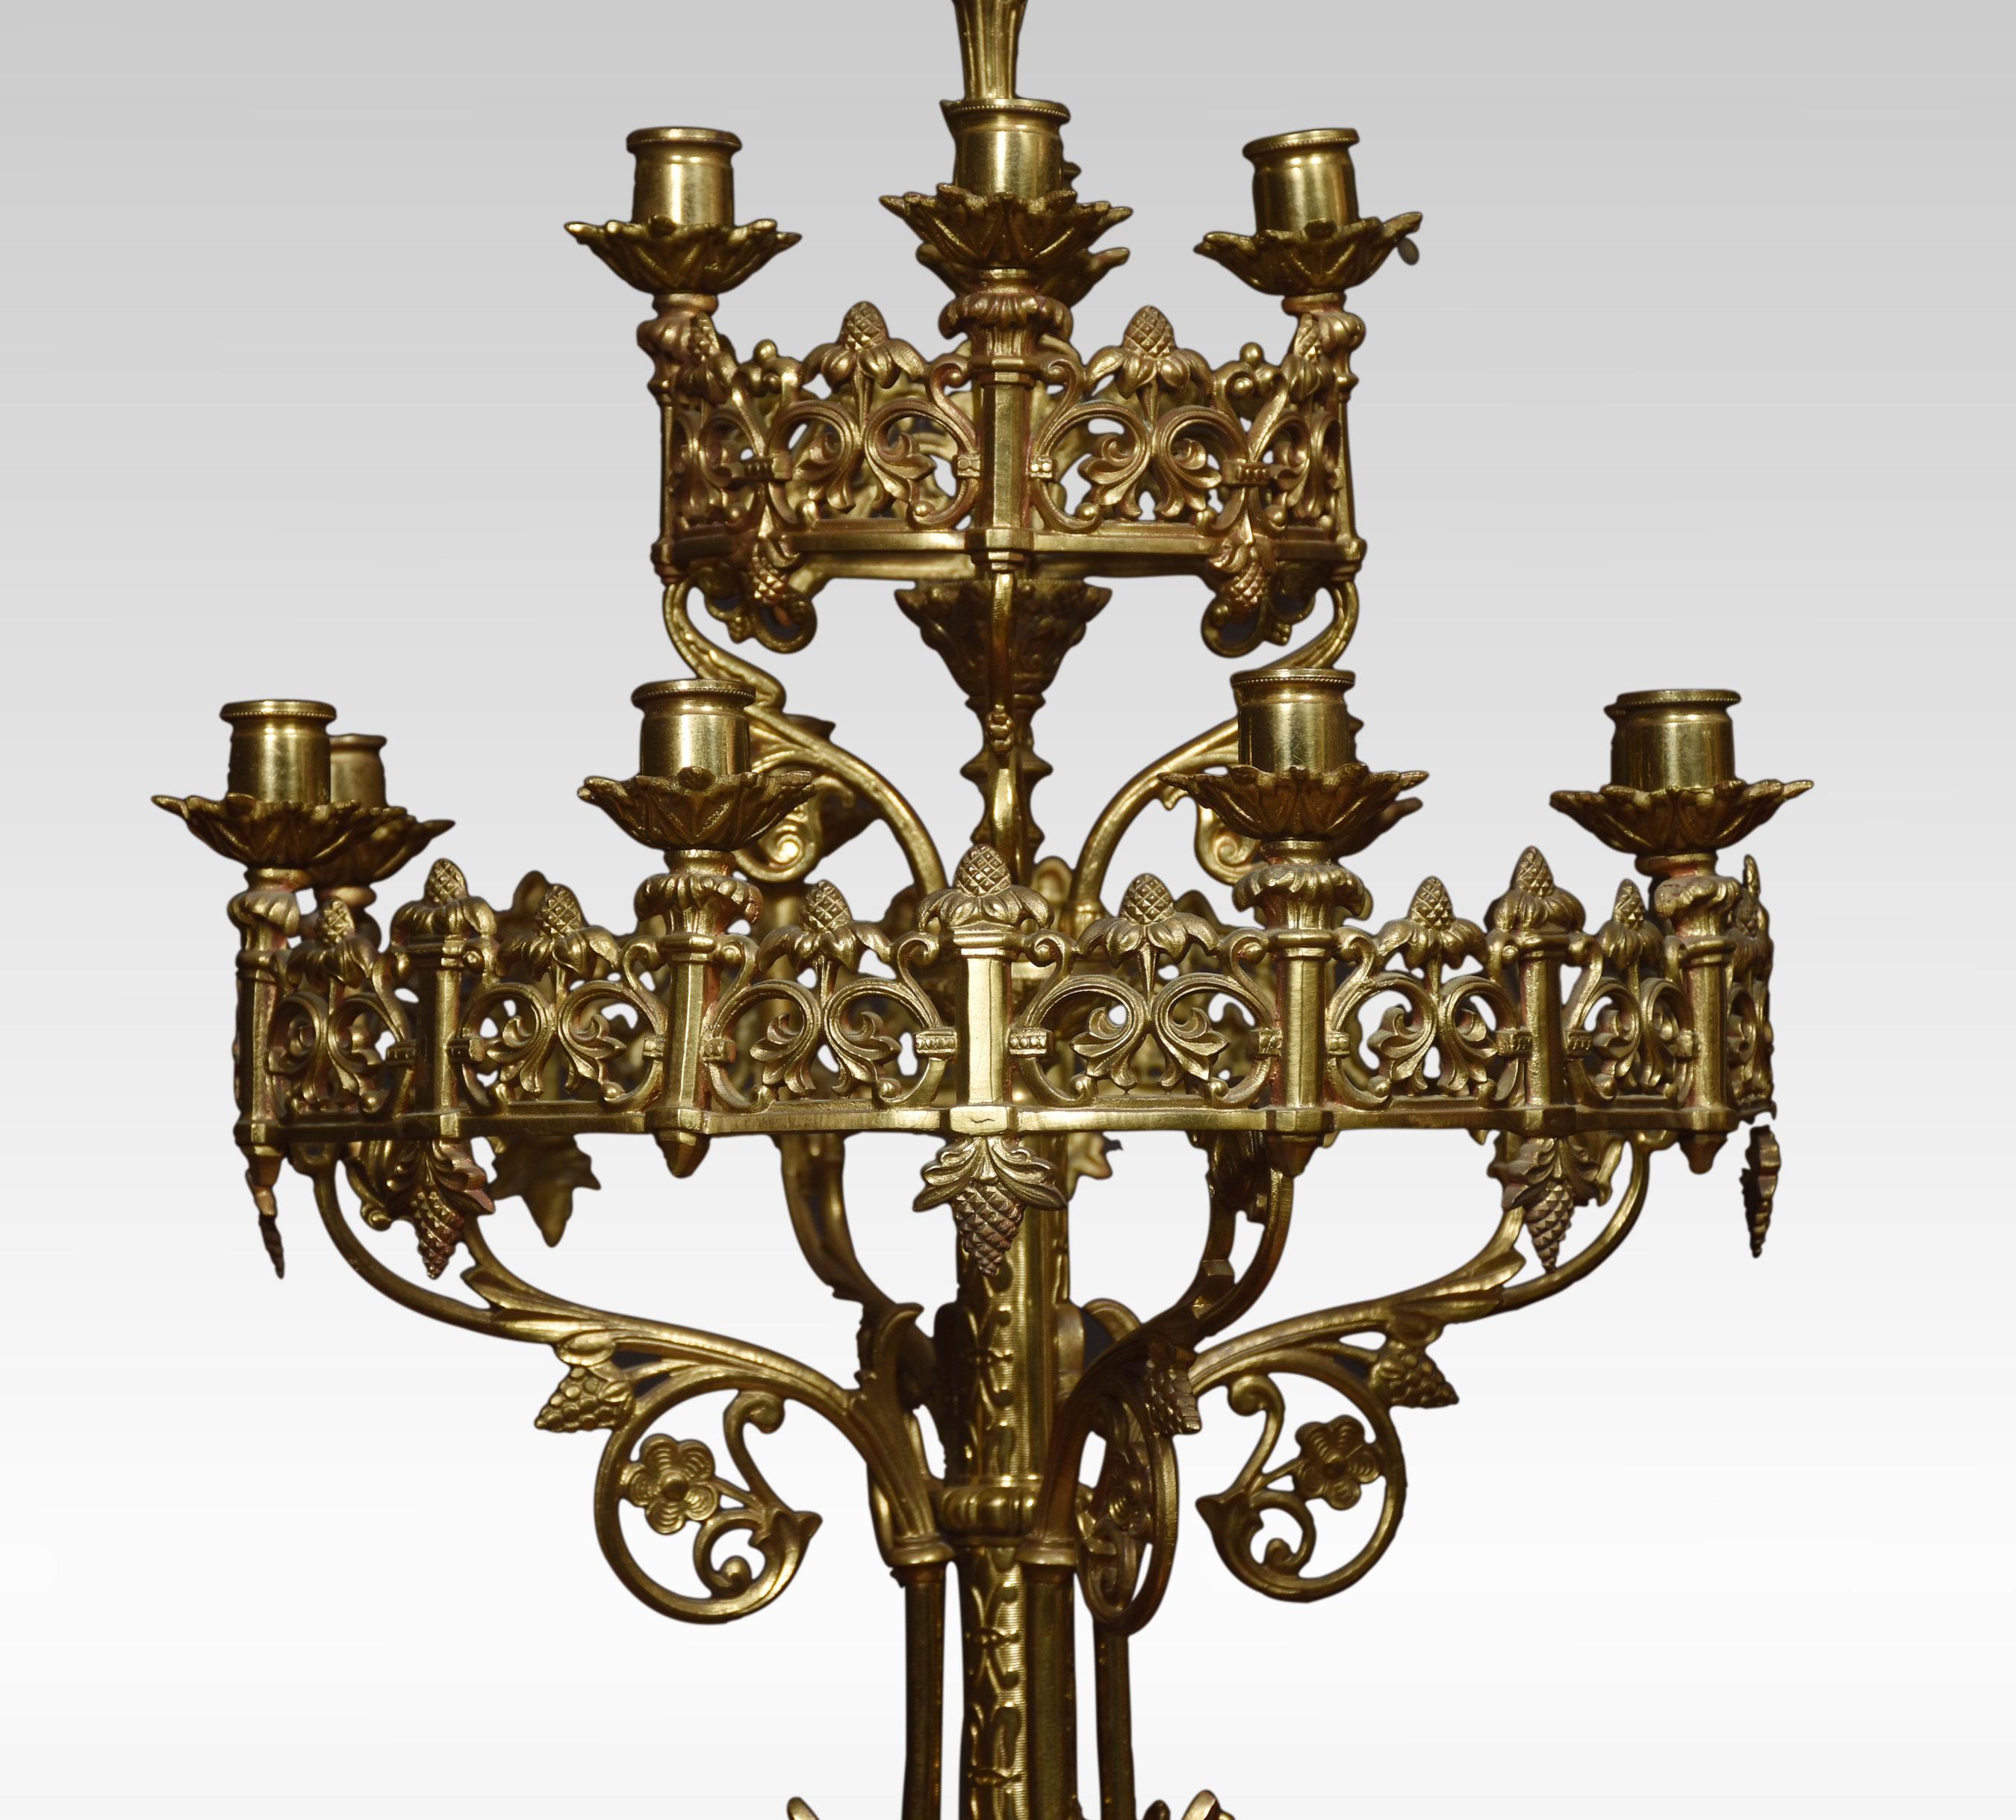 Pair of large 19th Century Gothic revival brass candelabras, the pierced foliated decorated frames with thirteen candle holders raised up on turned stem terminating in paw feet.
Dimensions
Height 40.5 Inches
Width 16.5 Inches
Depth 16.5 Inches